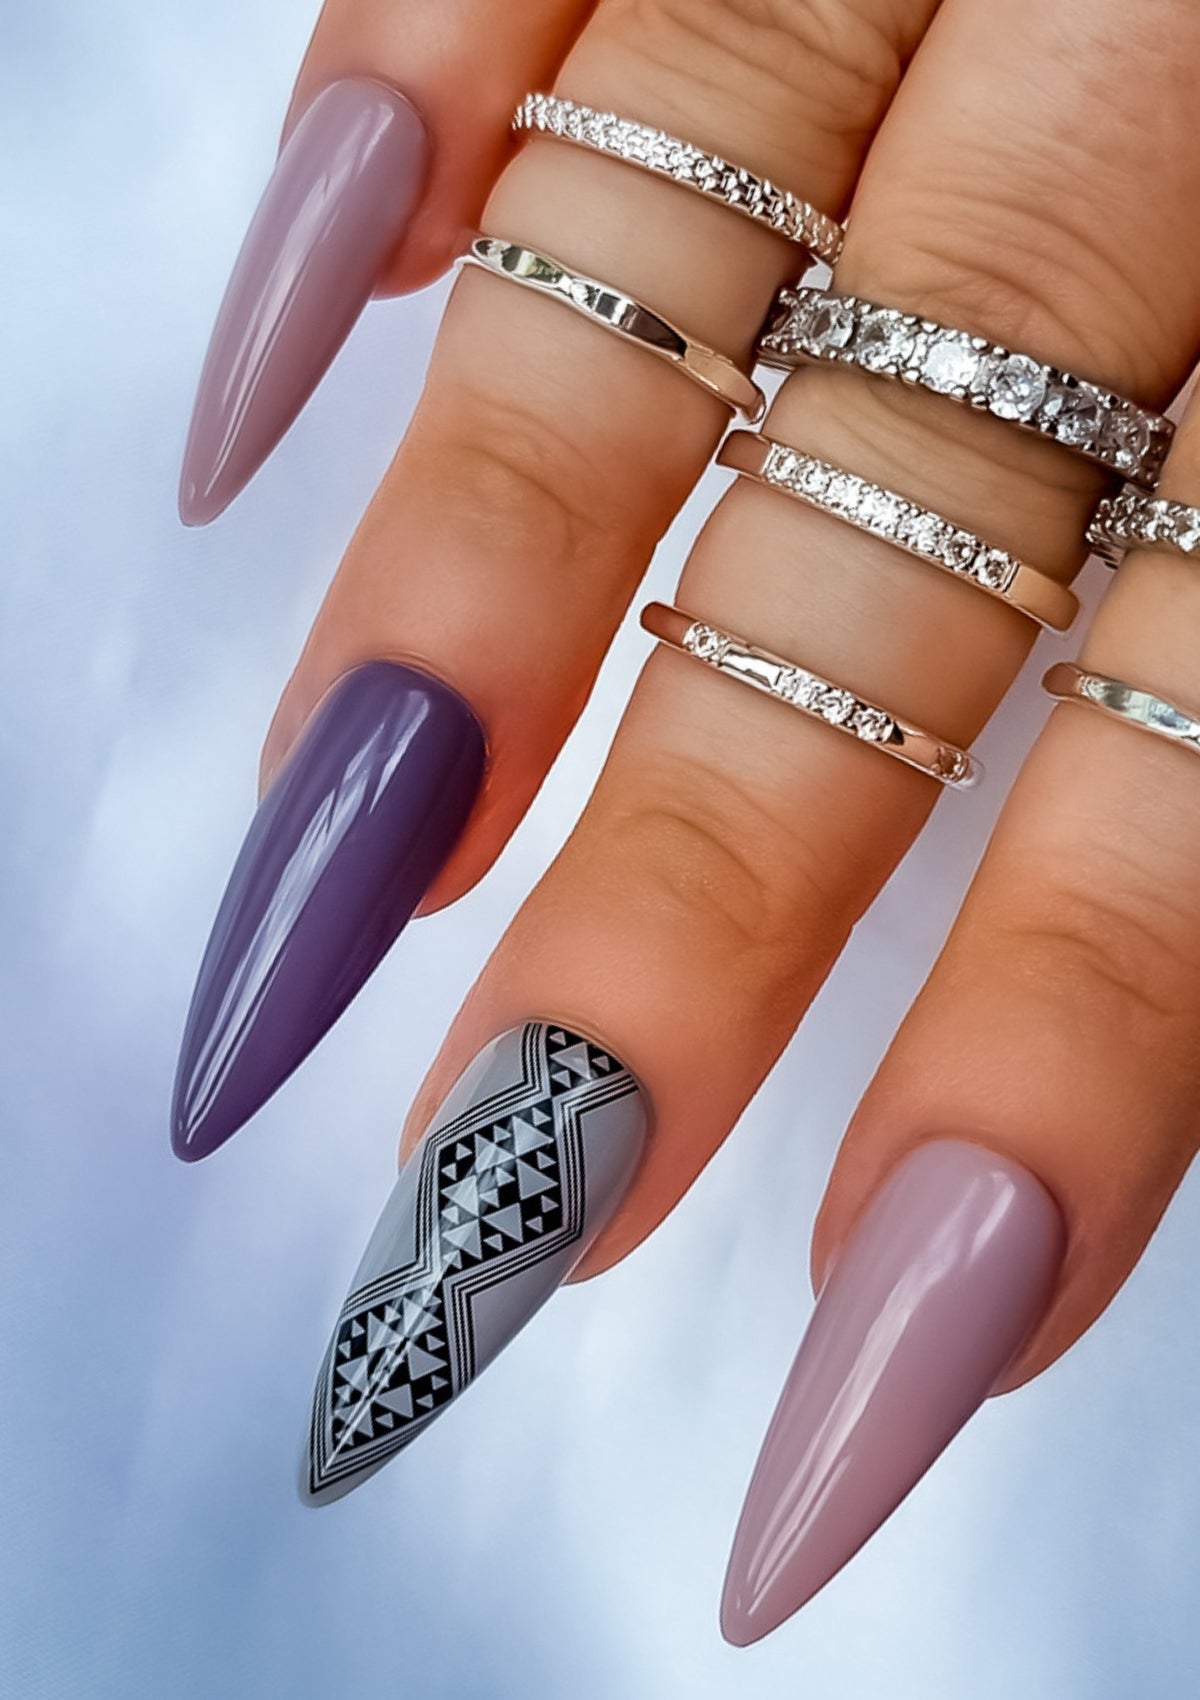 Long almond shaped nails in different shades of mauve and grey  with black Maori nail art on the middle finger. Nail art design in Aonui pattern by Adrienne Whitewood.  